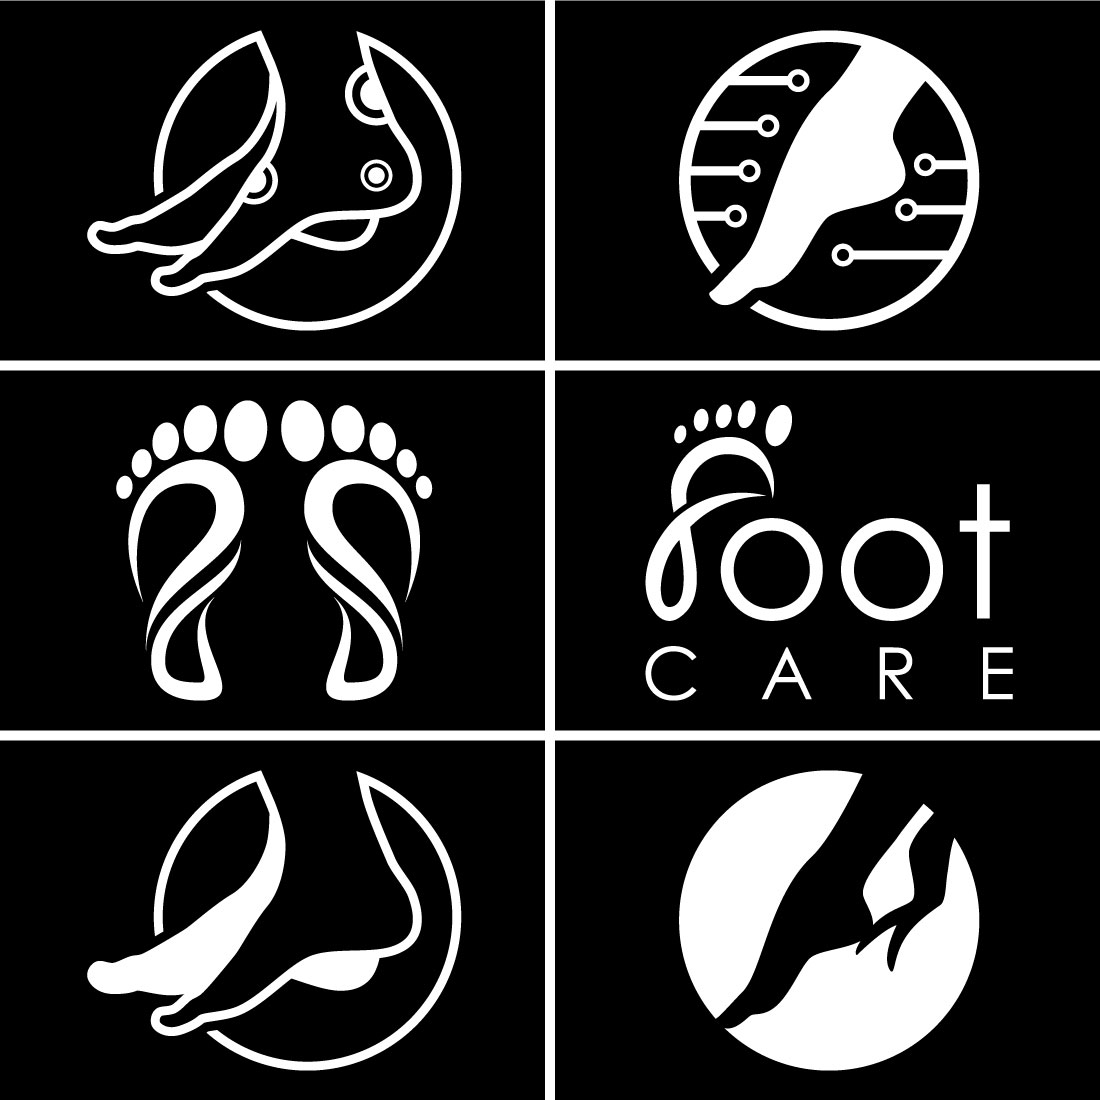 Foot Ankle Logo Stock Photos - 8,119 Images | Shutterstock